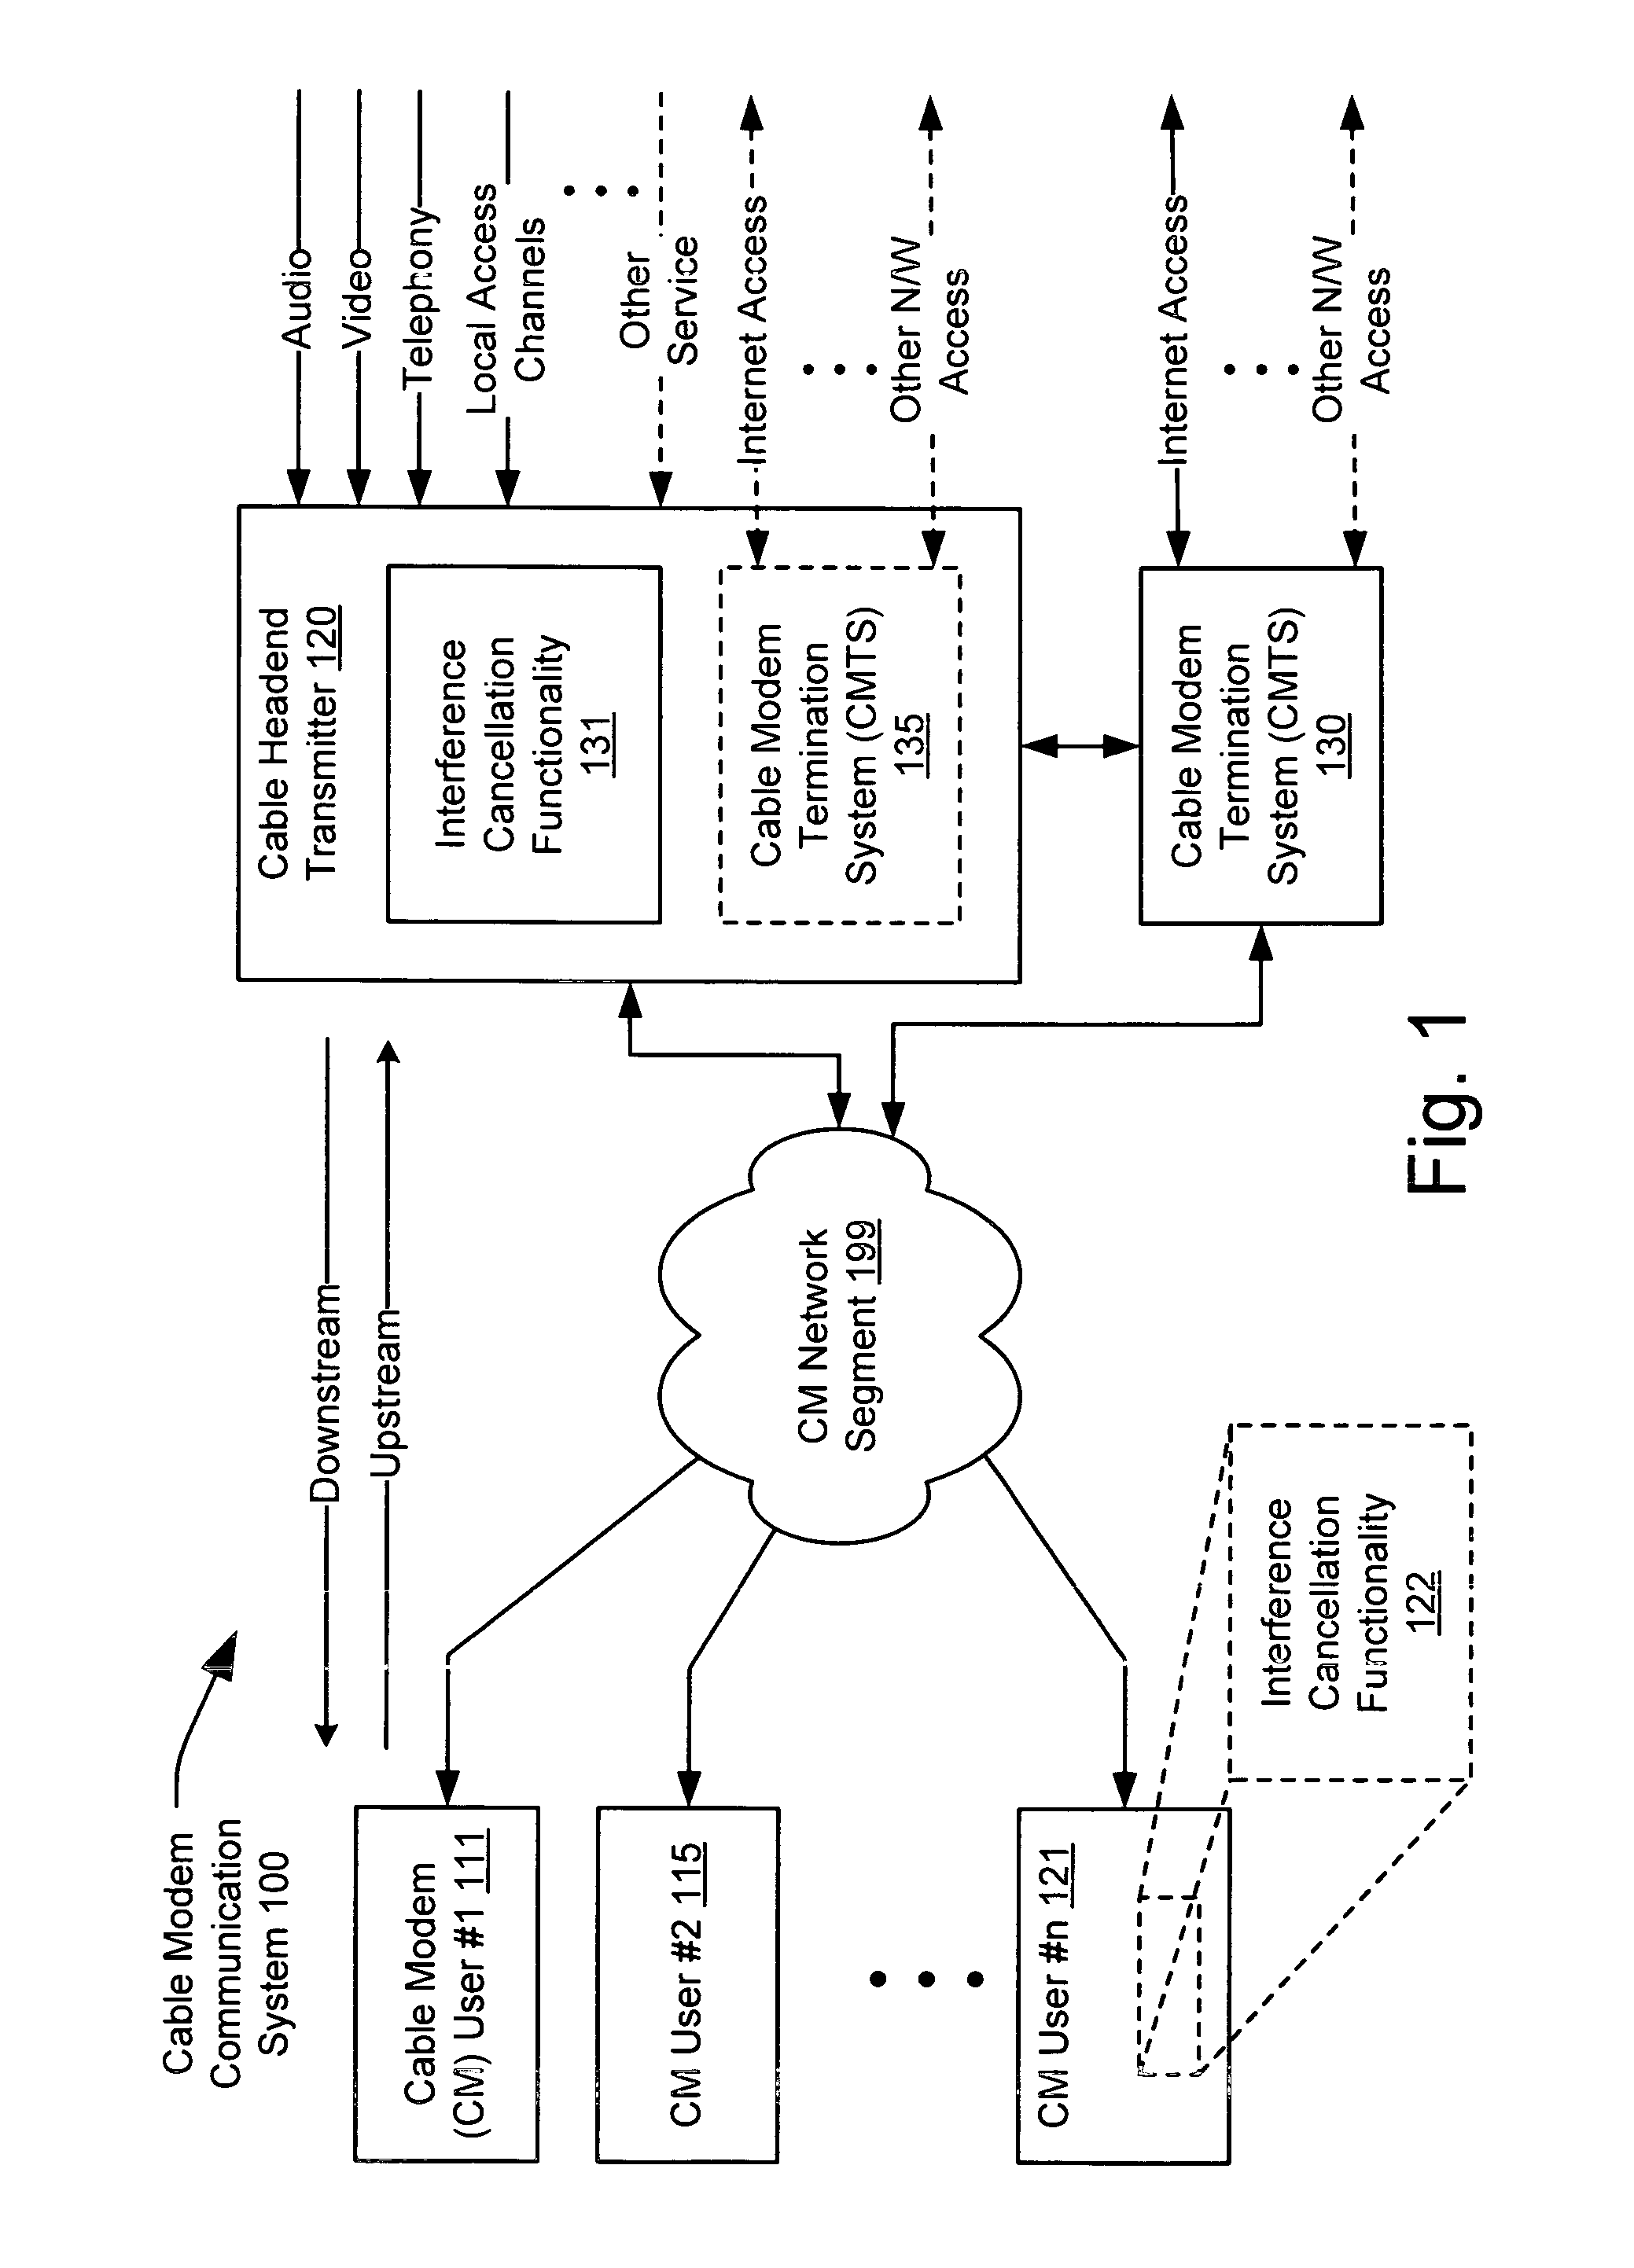 Cancellation of interference in a communication system with application to S-CDMA